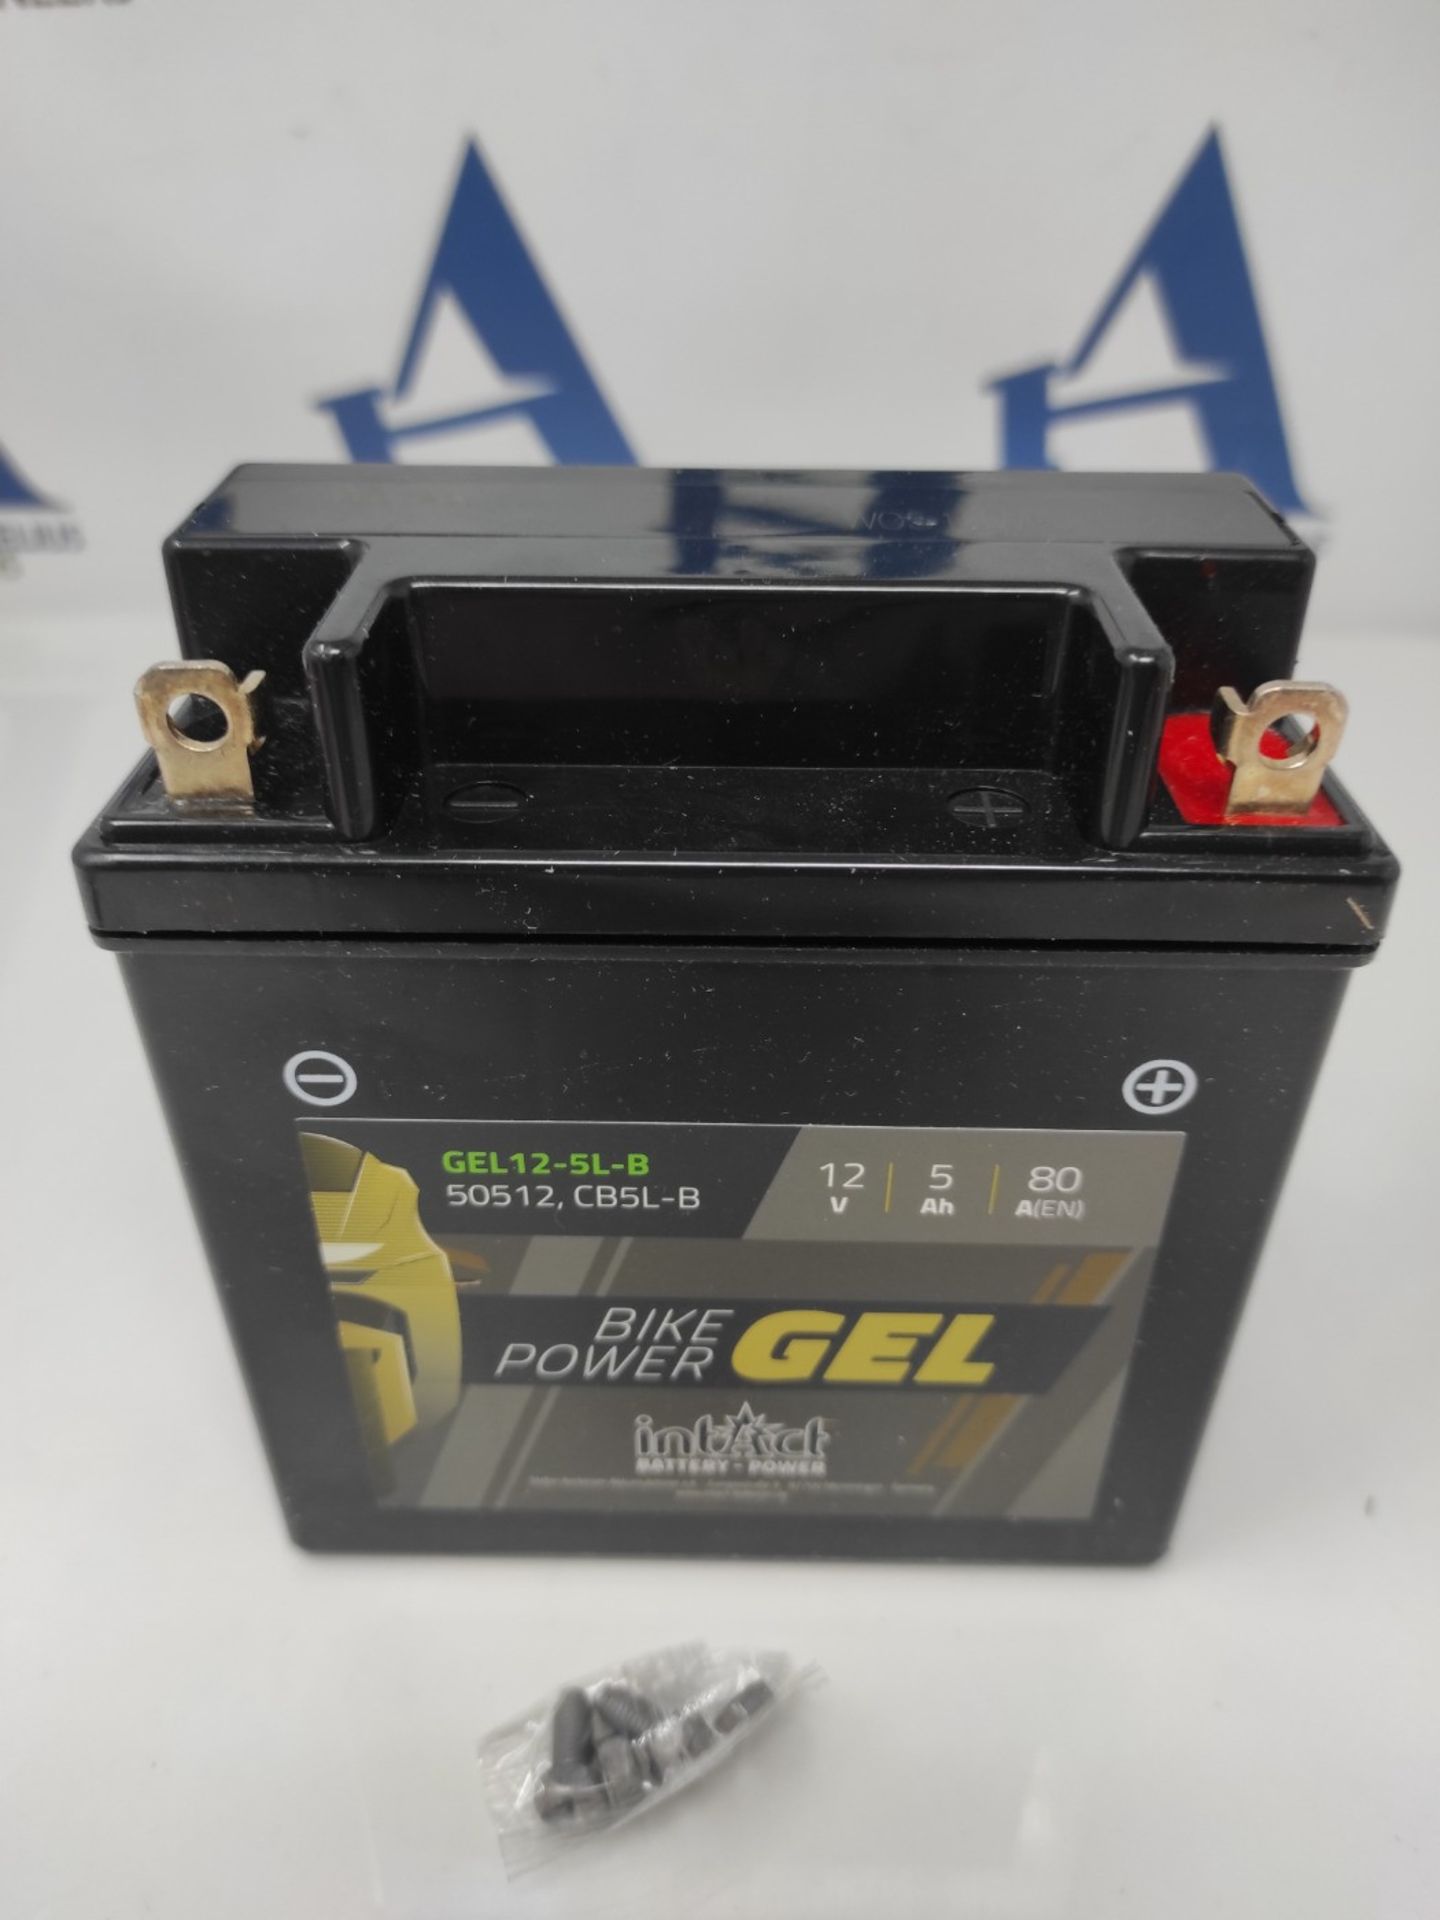 intAct - GEL MOTORCYCLE BATTERY | Battery with +30% starting power. For scooters, moto - Image 3 of 3